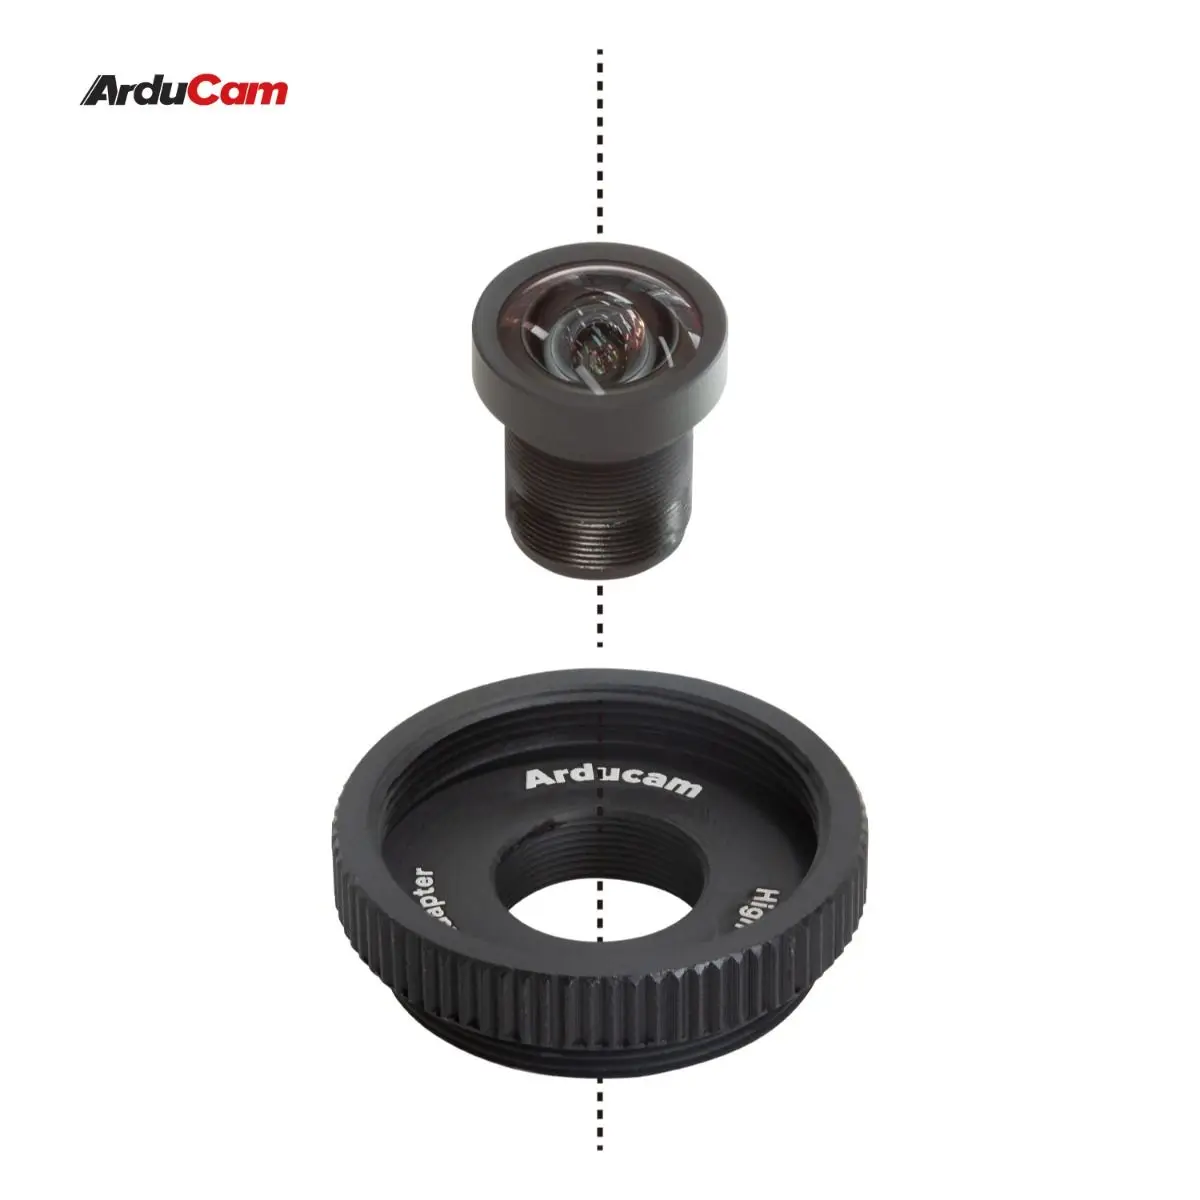 

Arducam 100 Degree Low distortion 1/2.3″ M12 Lens with Lens Adapter for Raspberry Pi High Quality Camera